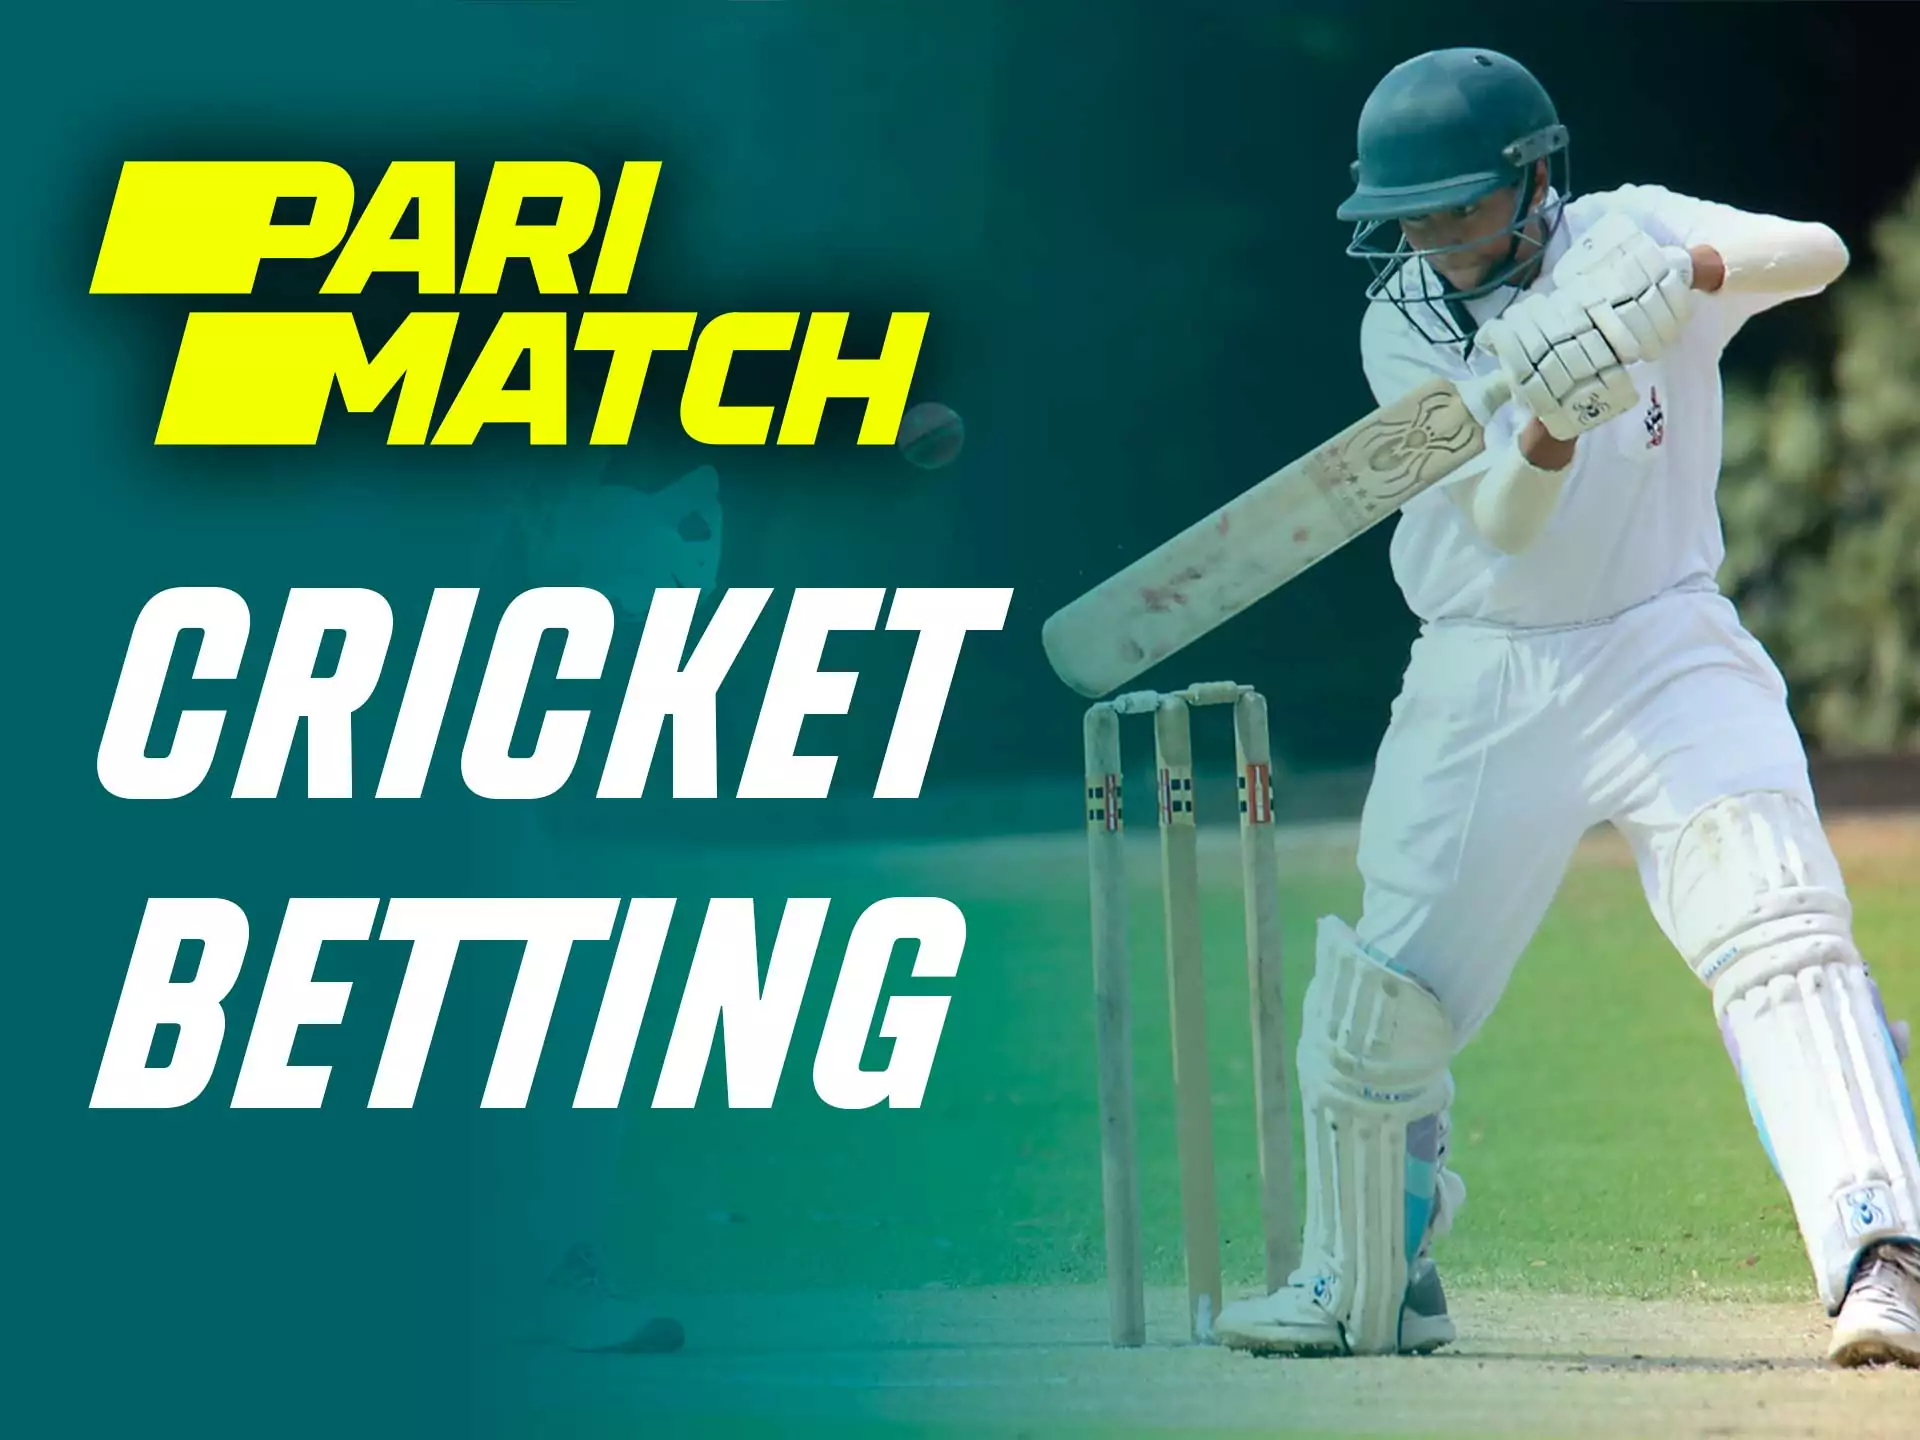 You can surely place bets on cricket at Parimatch.